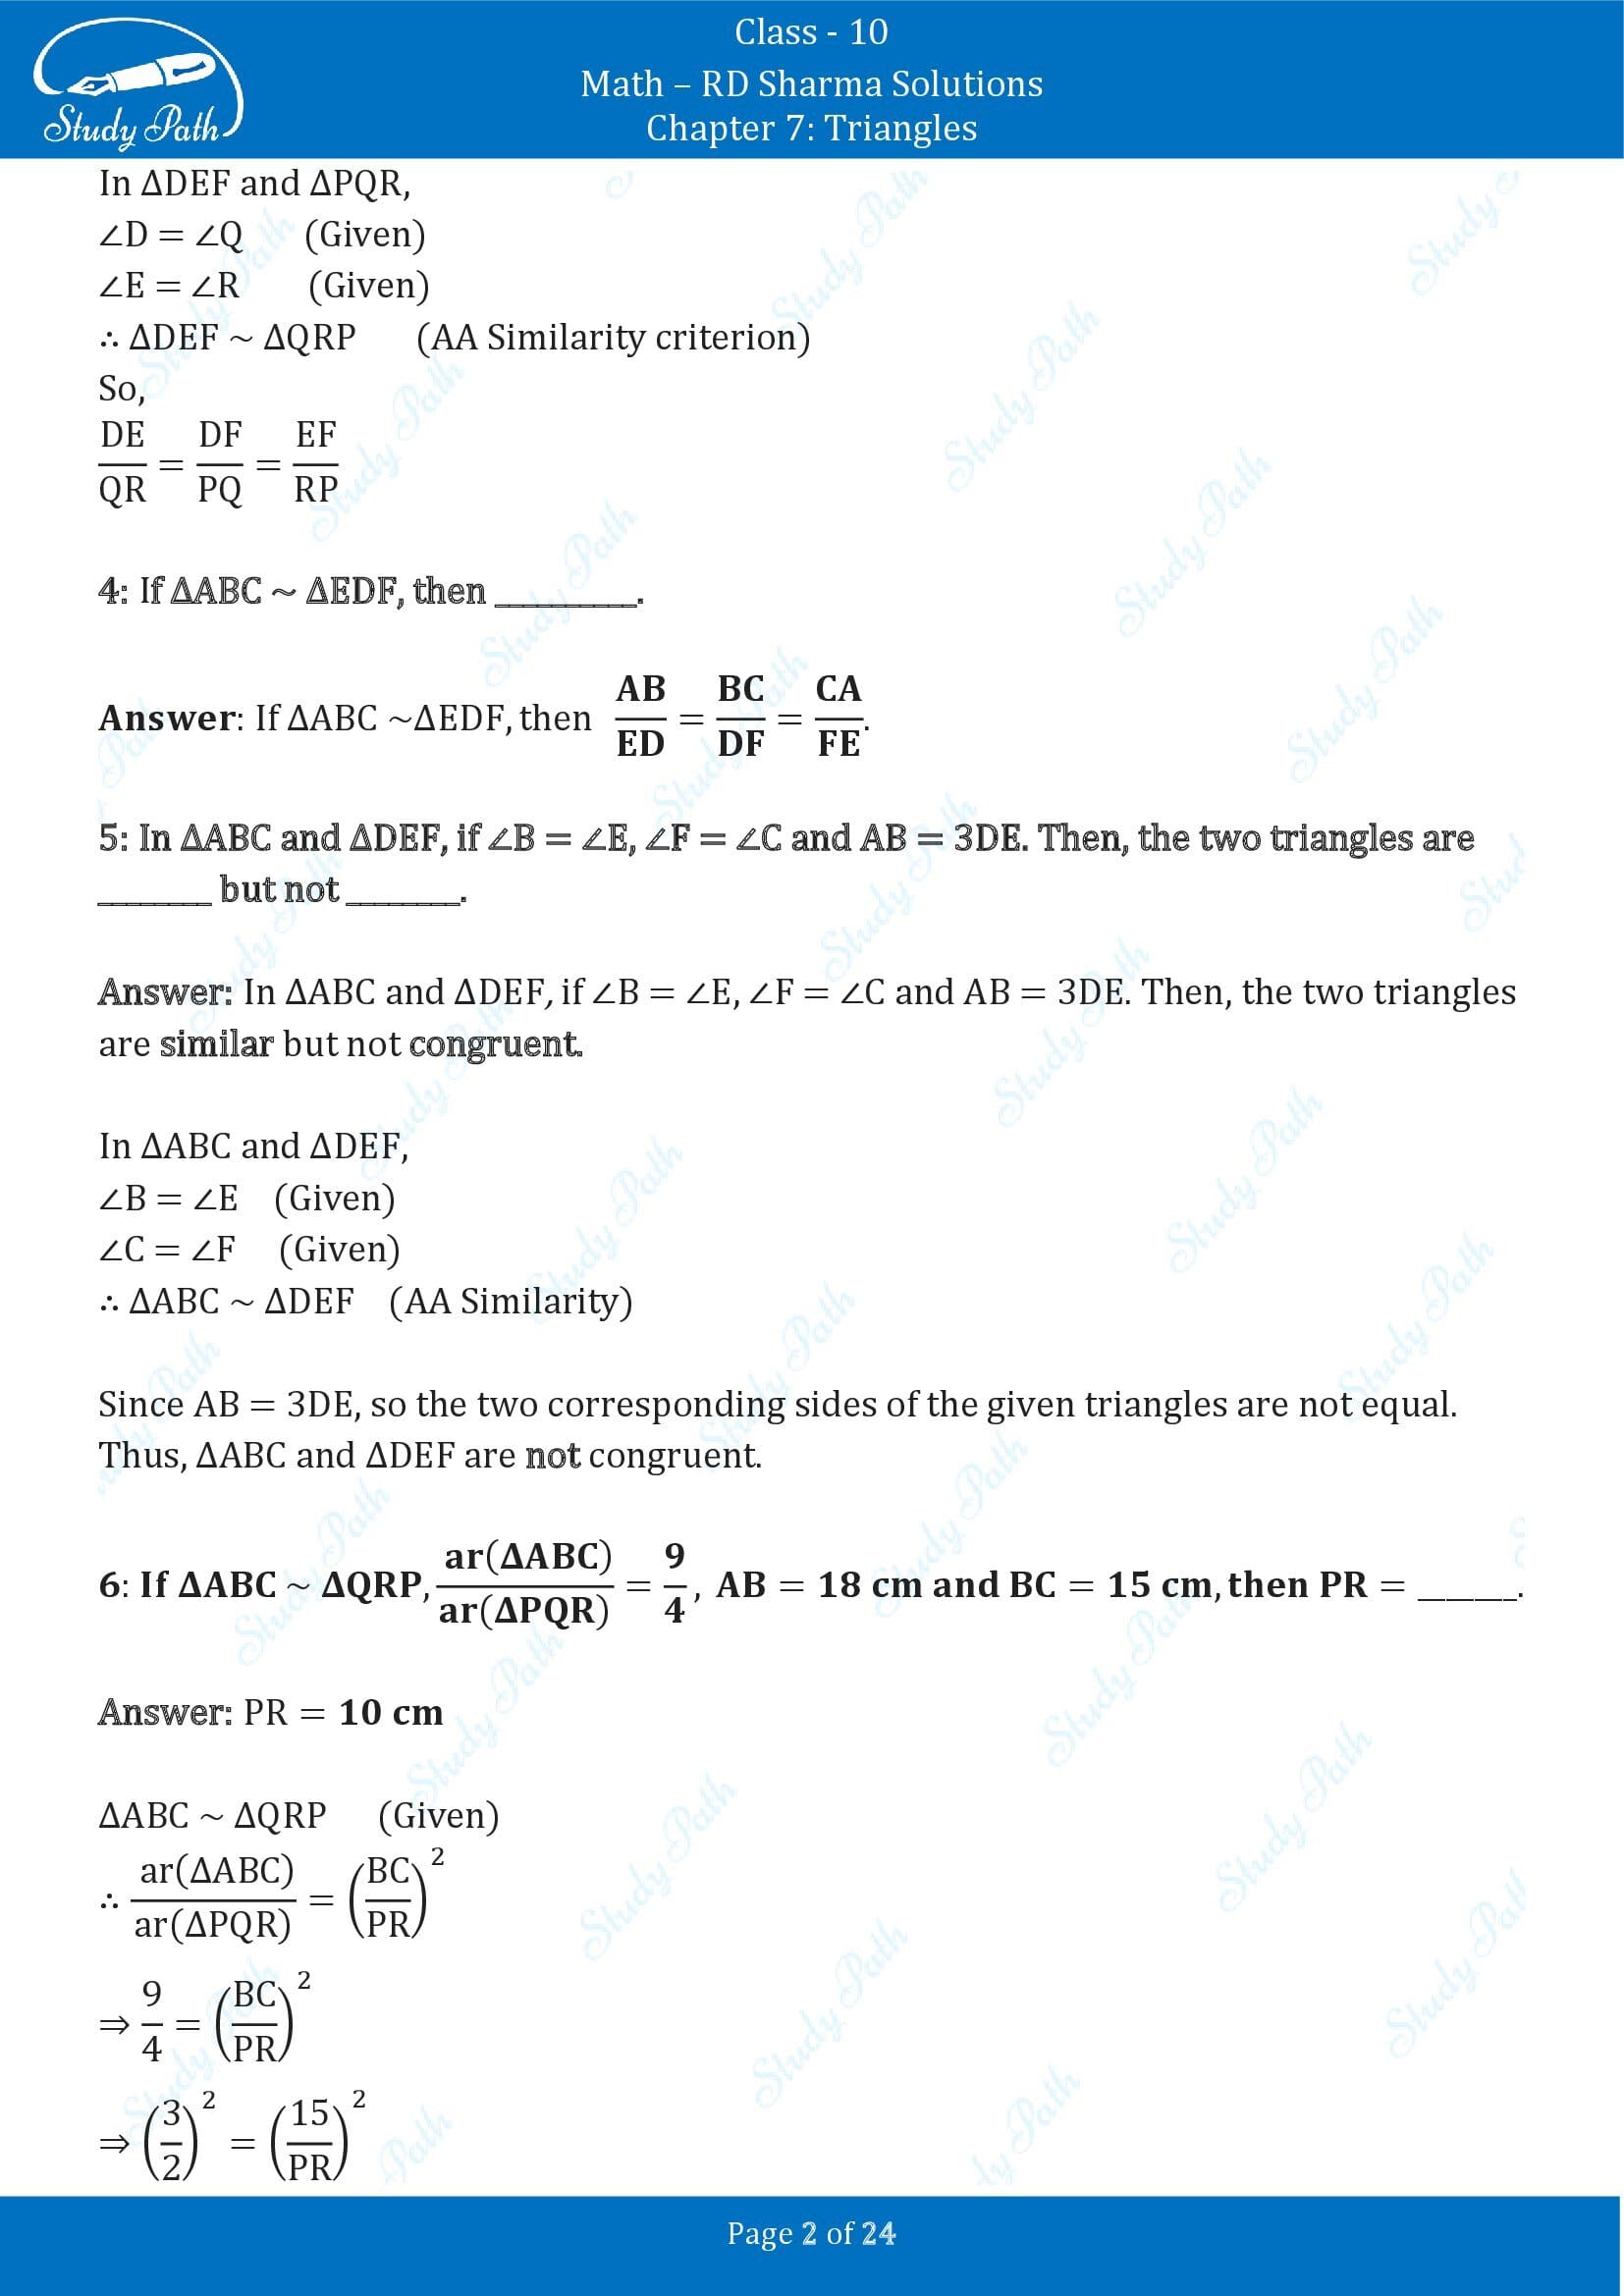 RD Sharma Solutions Class 10 Chapter 7 Triangles Fill in the Blank Type Questions FBQs 00002